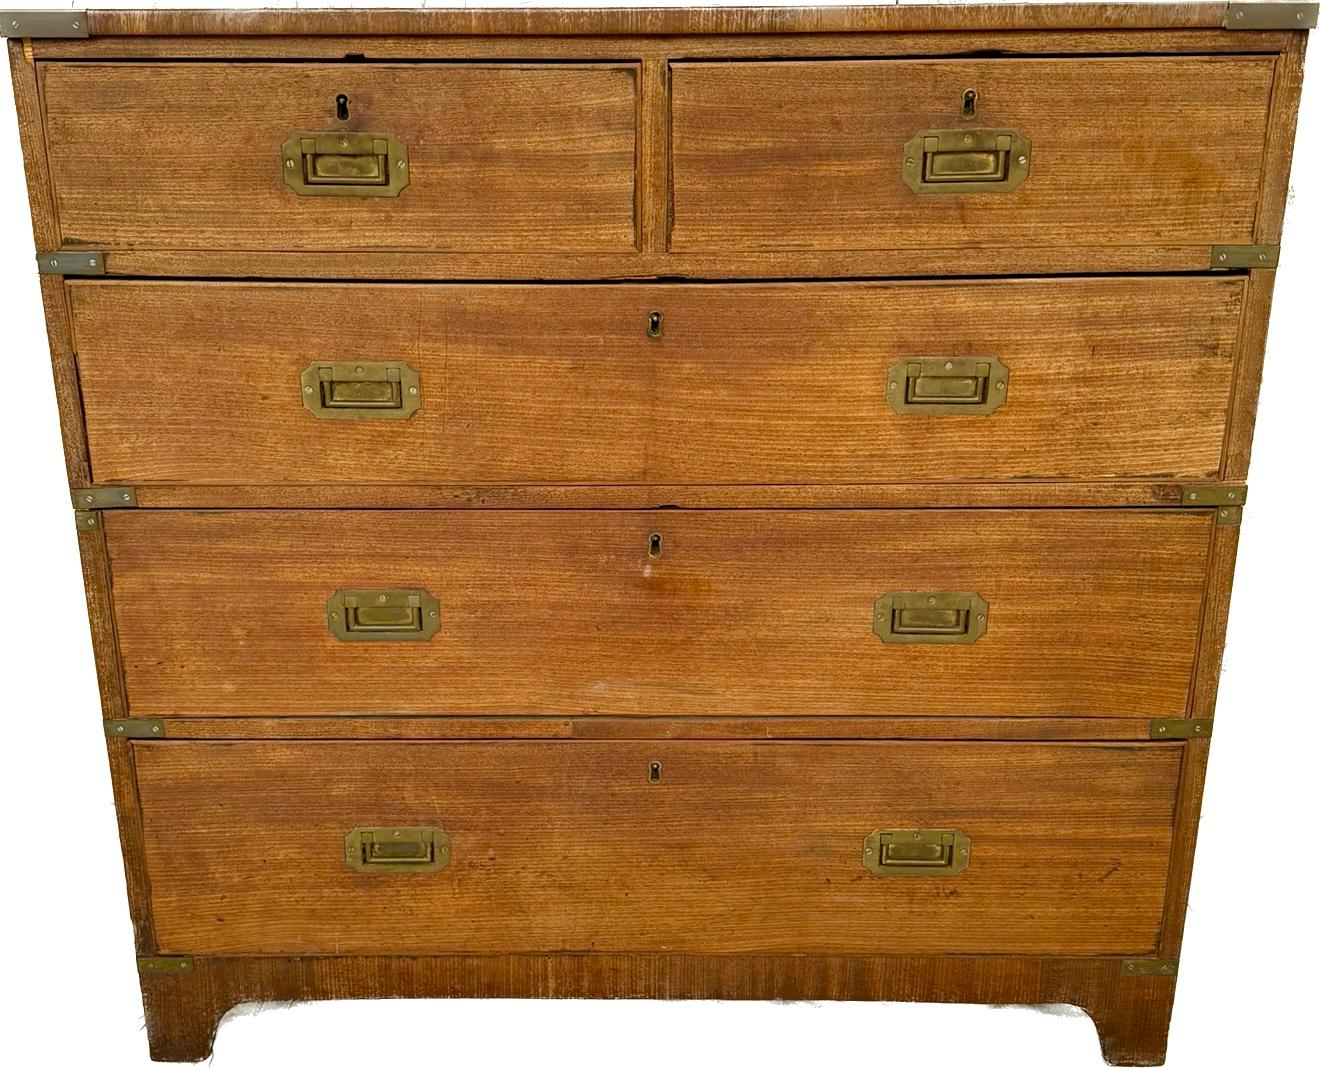 19th century English Campaign Chest. Chest of drawers has two drawers on top of three larger, more substantial drawers. Campaign chest splits into two sections which was used for ease of transportation in military campaigns. Chest is made of